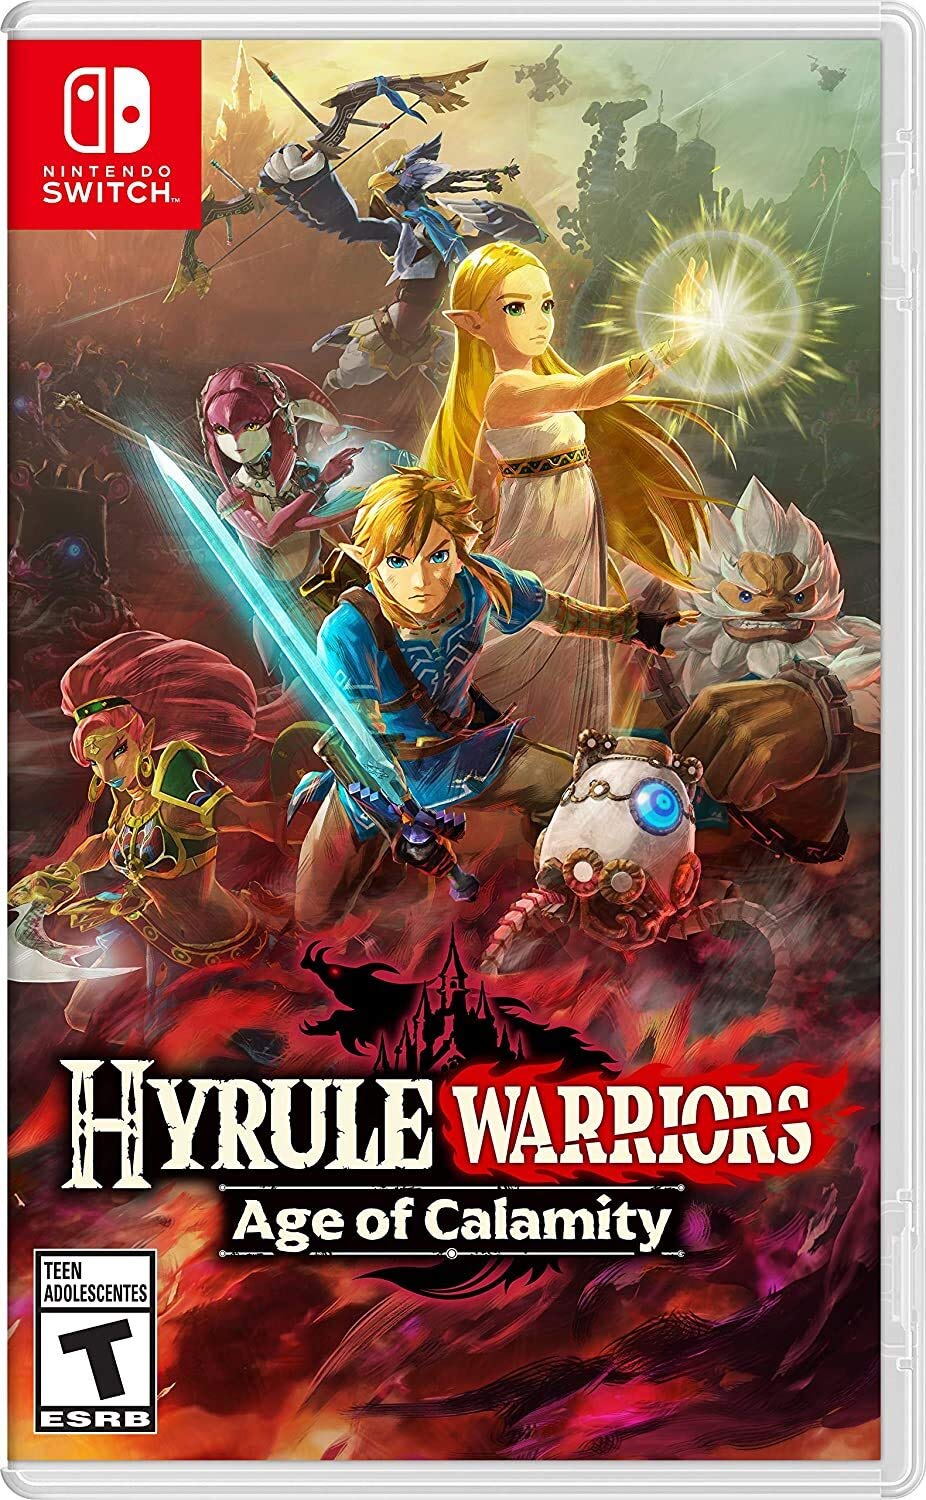 Hyrule Warriors: Age of Calamity - Nintendo Switch (physical) $49.94